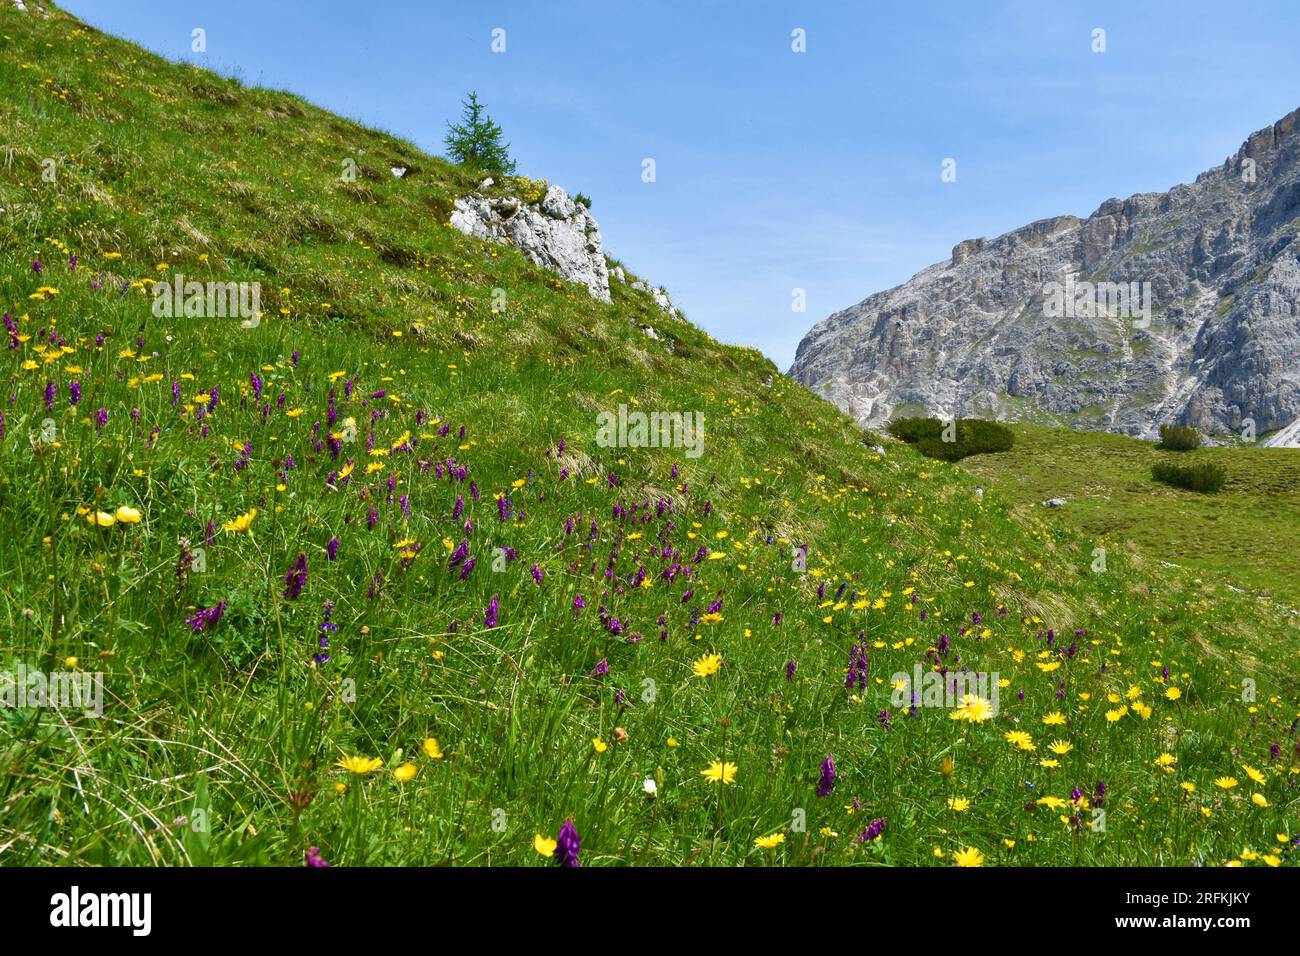 Colorful alpine meadow with pink and yellow flowers incl. alpine sainfoin (Hedysarum hedysaroides) at Valparola pass in Dolomite mountains, Veneto reg Stock Photo